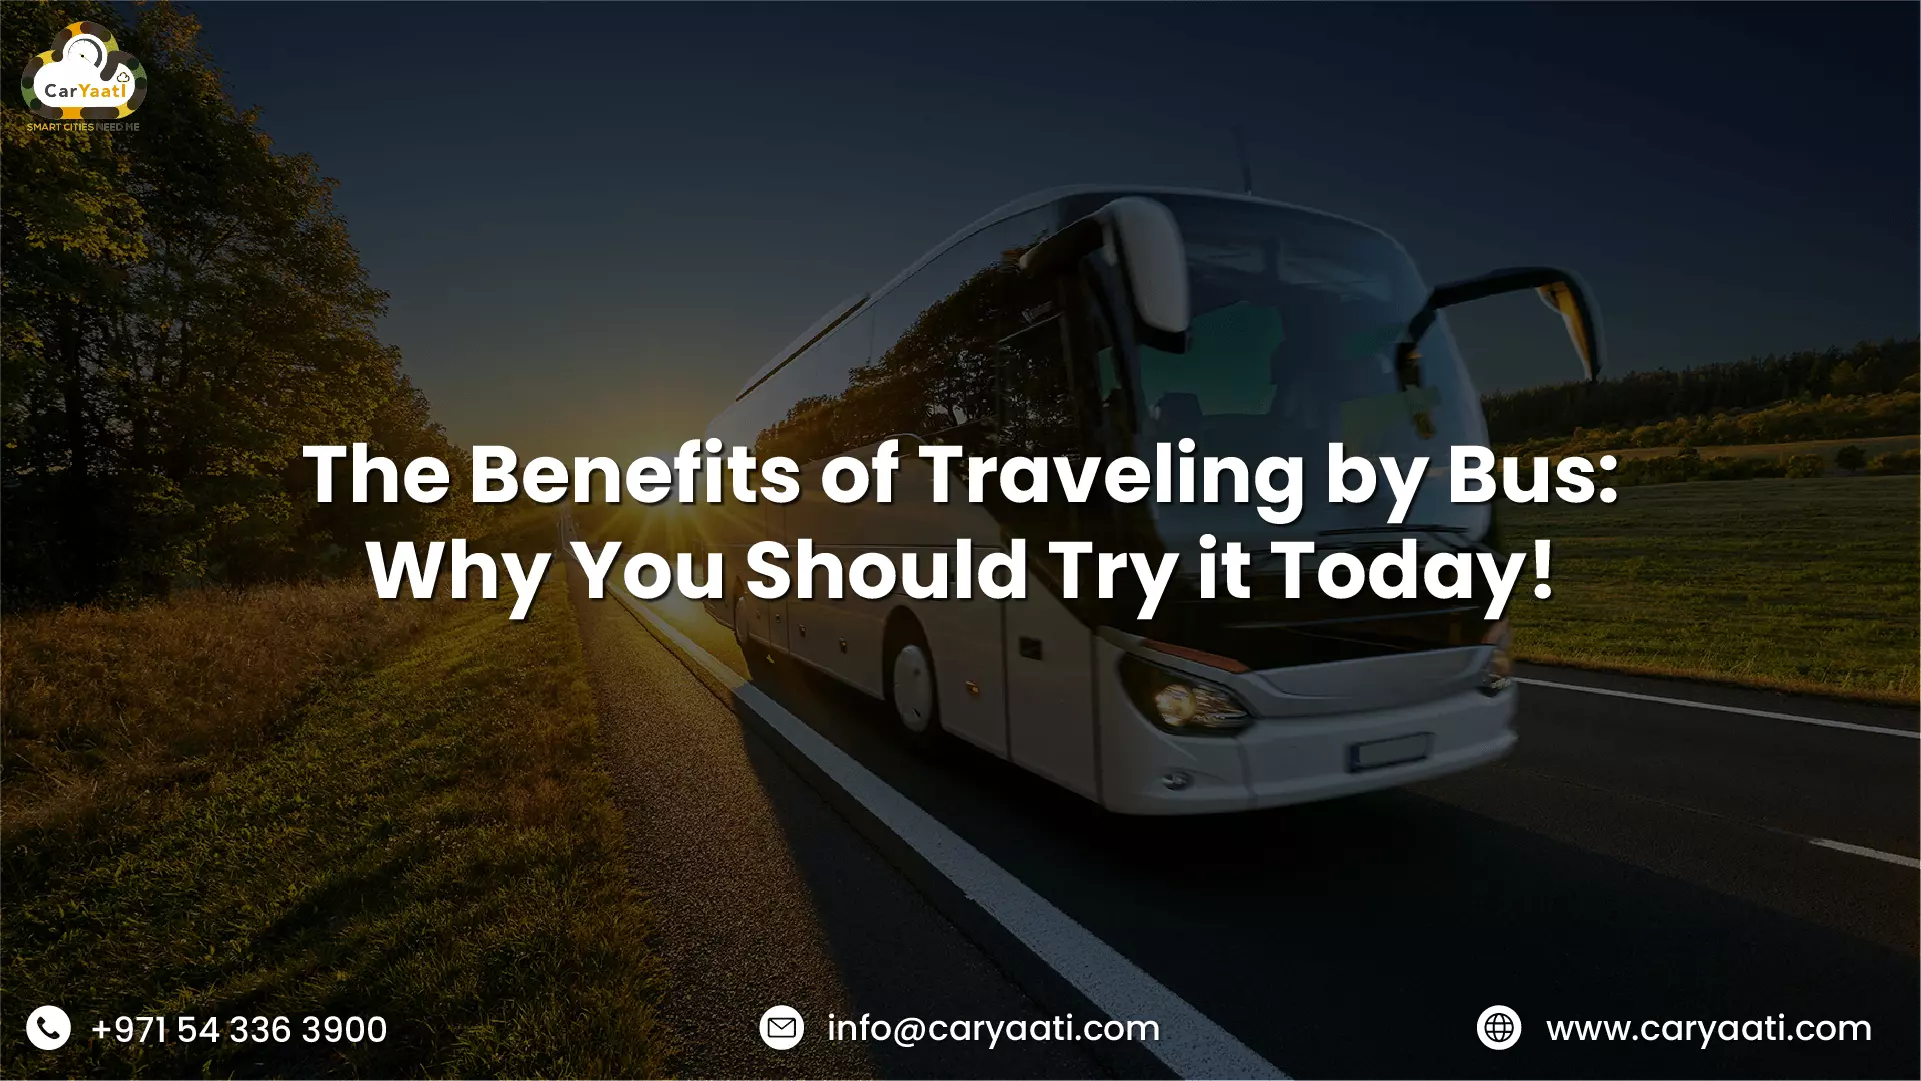 The Benefits of Traveling by Bus: Why You Should Try it Today!